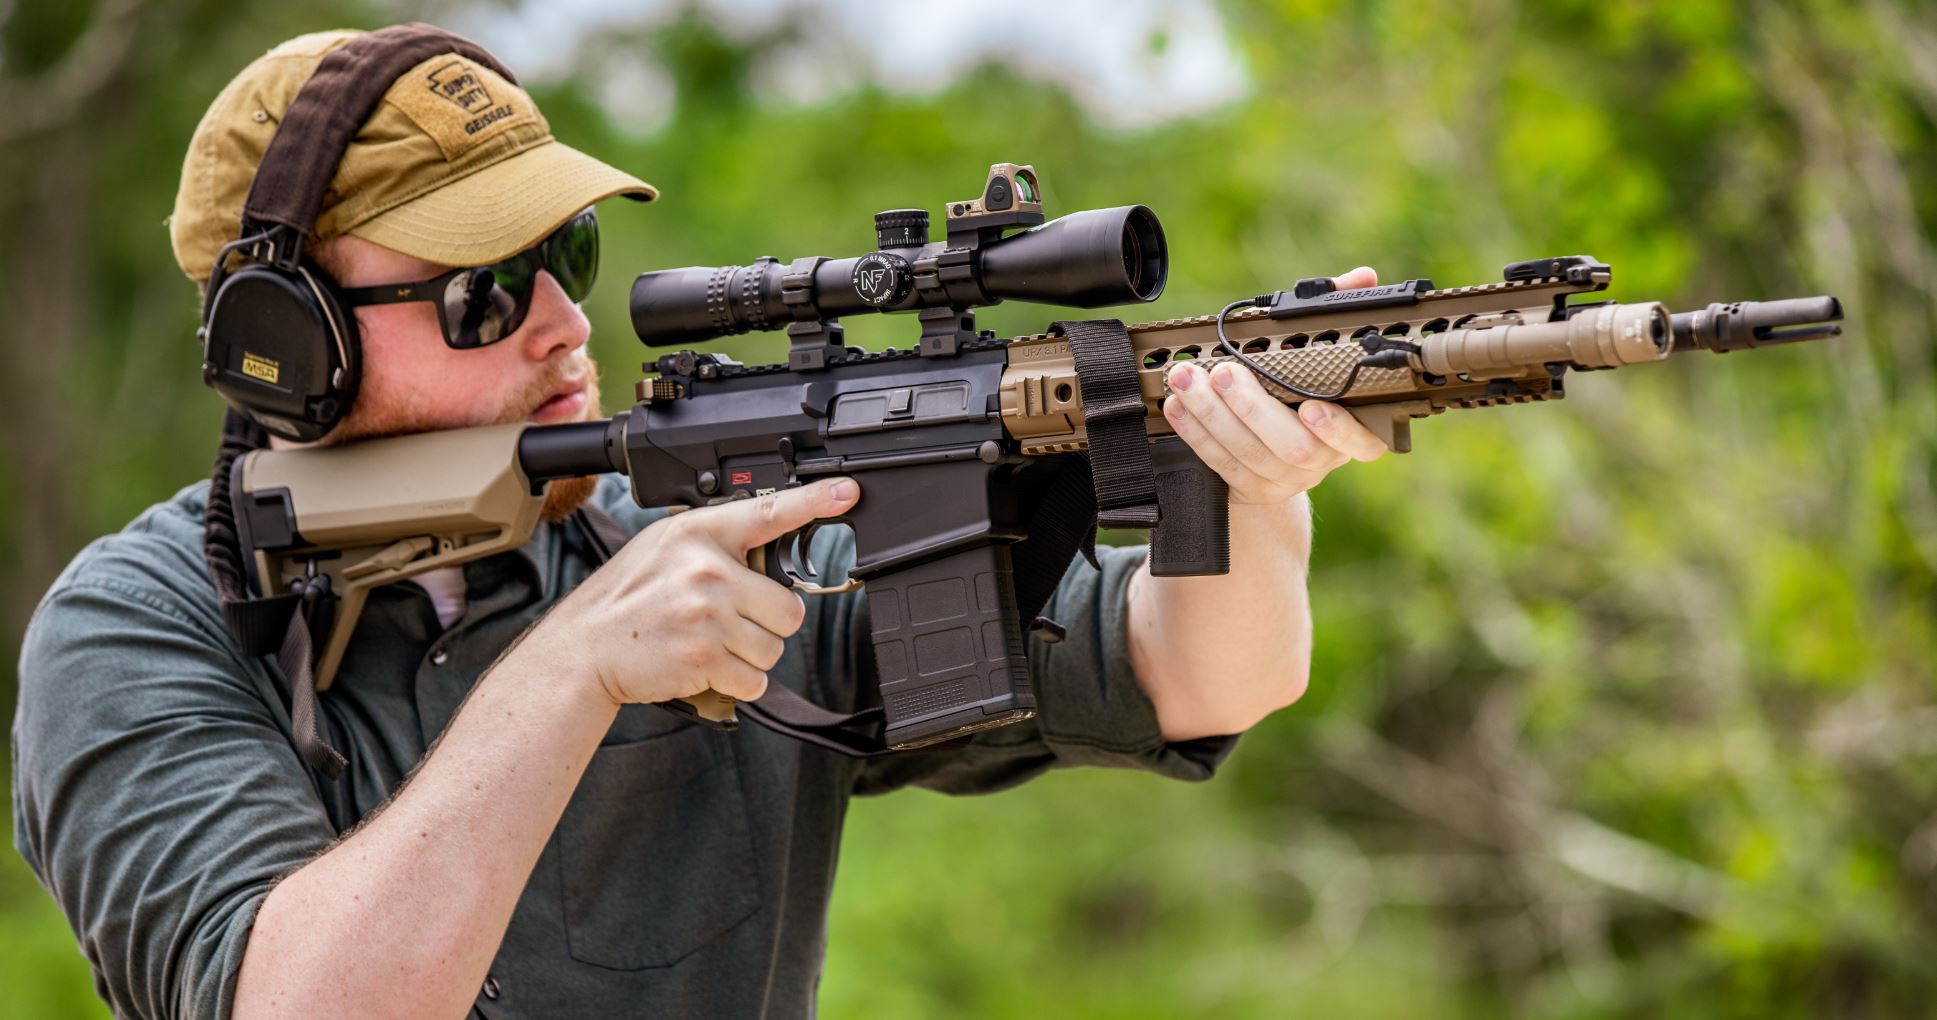 Red Dot Sights VS. Rifle Scope: What’s the Best for AR-15?